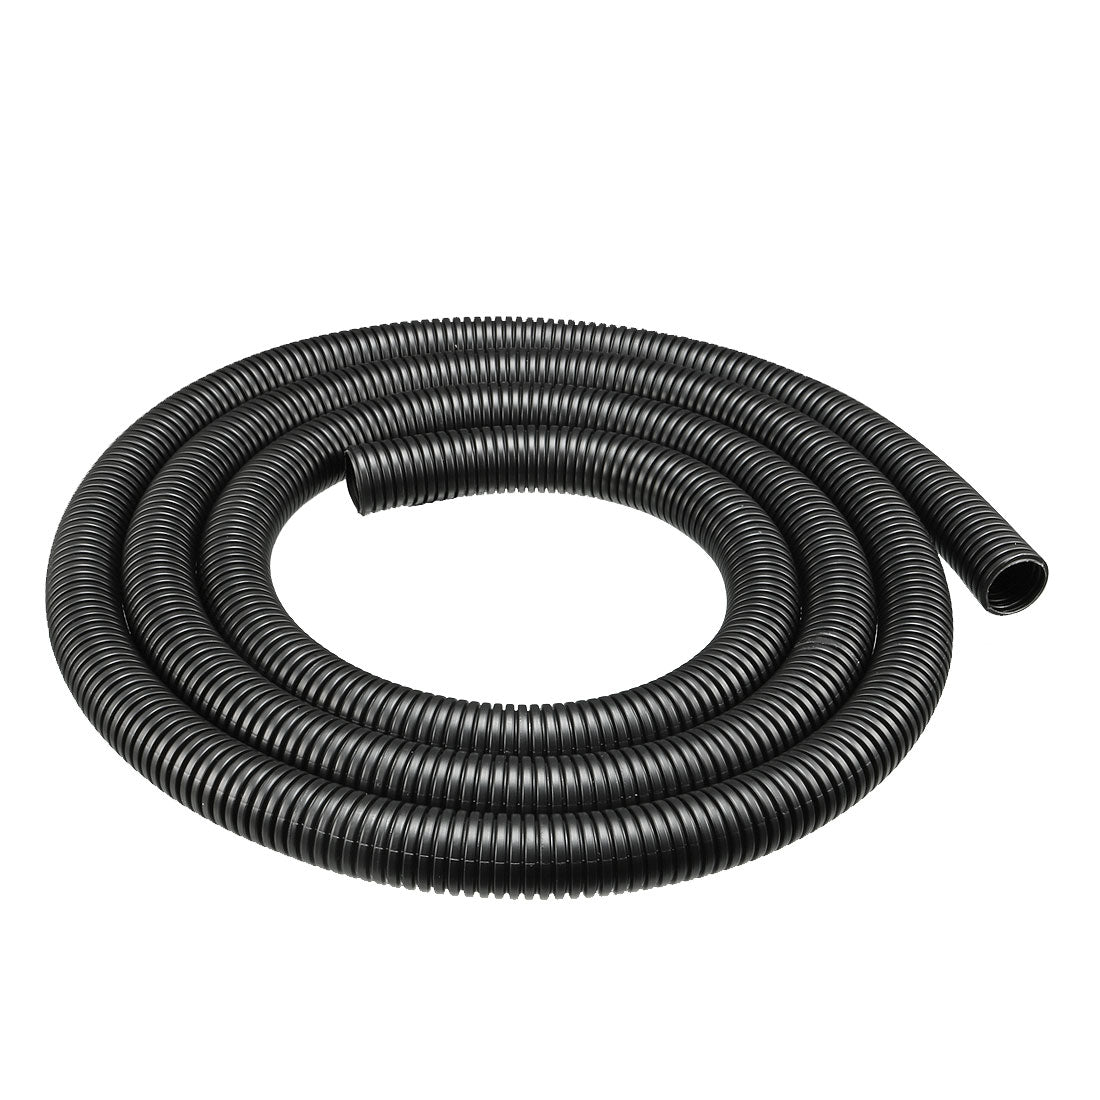 uxcell Uxcell 1.6 M 16 x 20 mm PP Flexible Corrugated Conduit Tube for Garden,Office Black